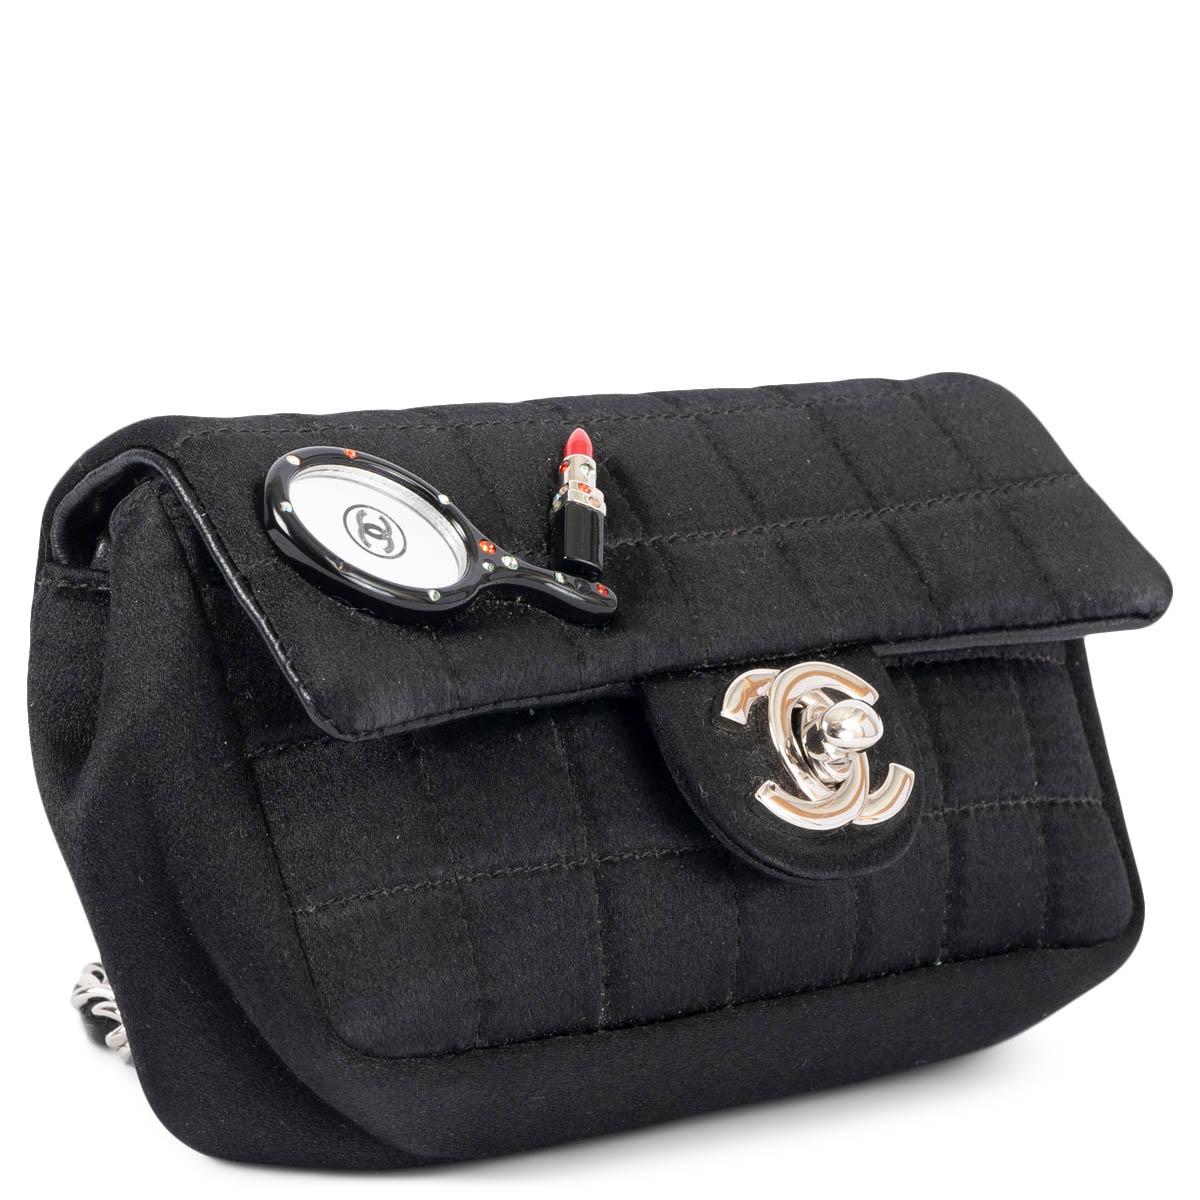 100% authentic Chanel 2004 Mirror & Lipstick shoulder bag in black quilted satin. The design features the classic silver-tone CC turn lock, chain shoulder-strap and is lined in a tonal jacquard logo satin. Has been carried and is in excellent